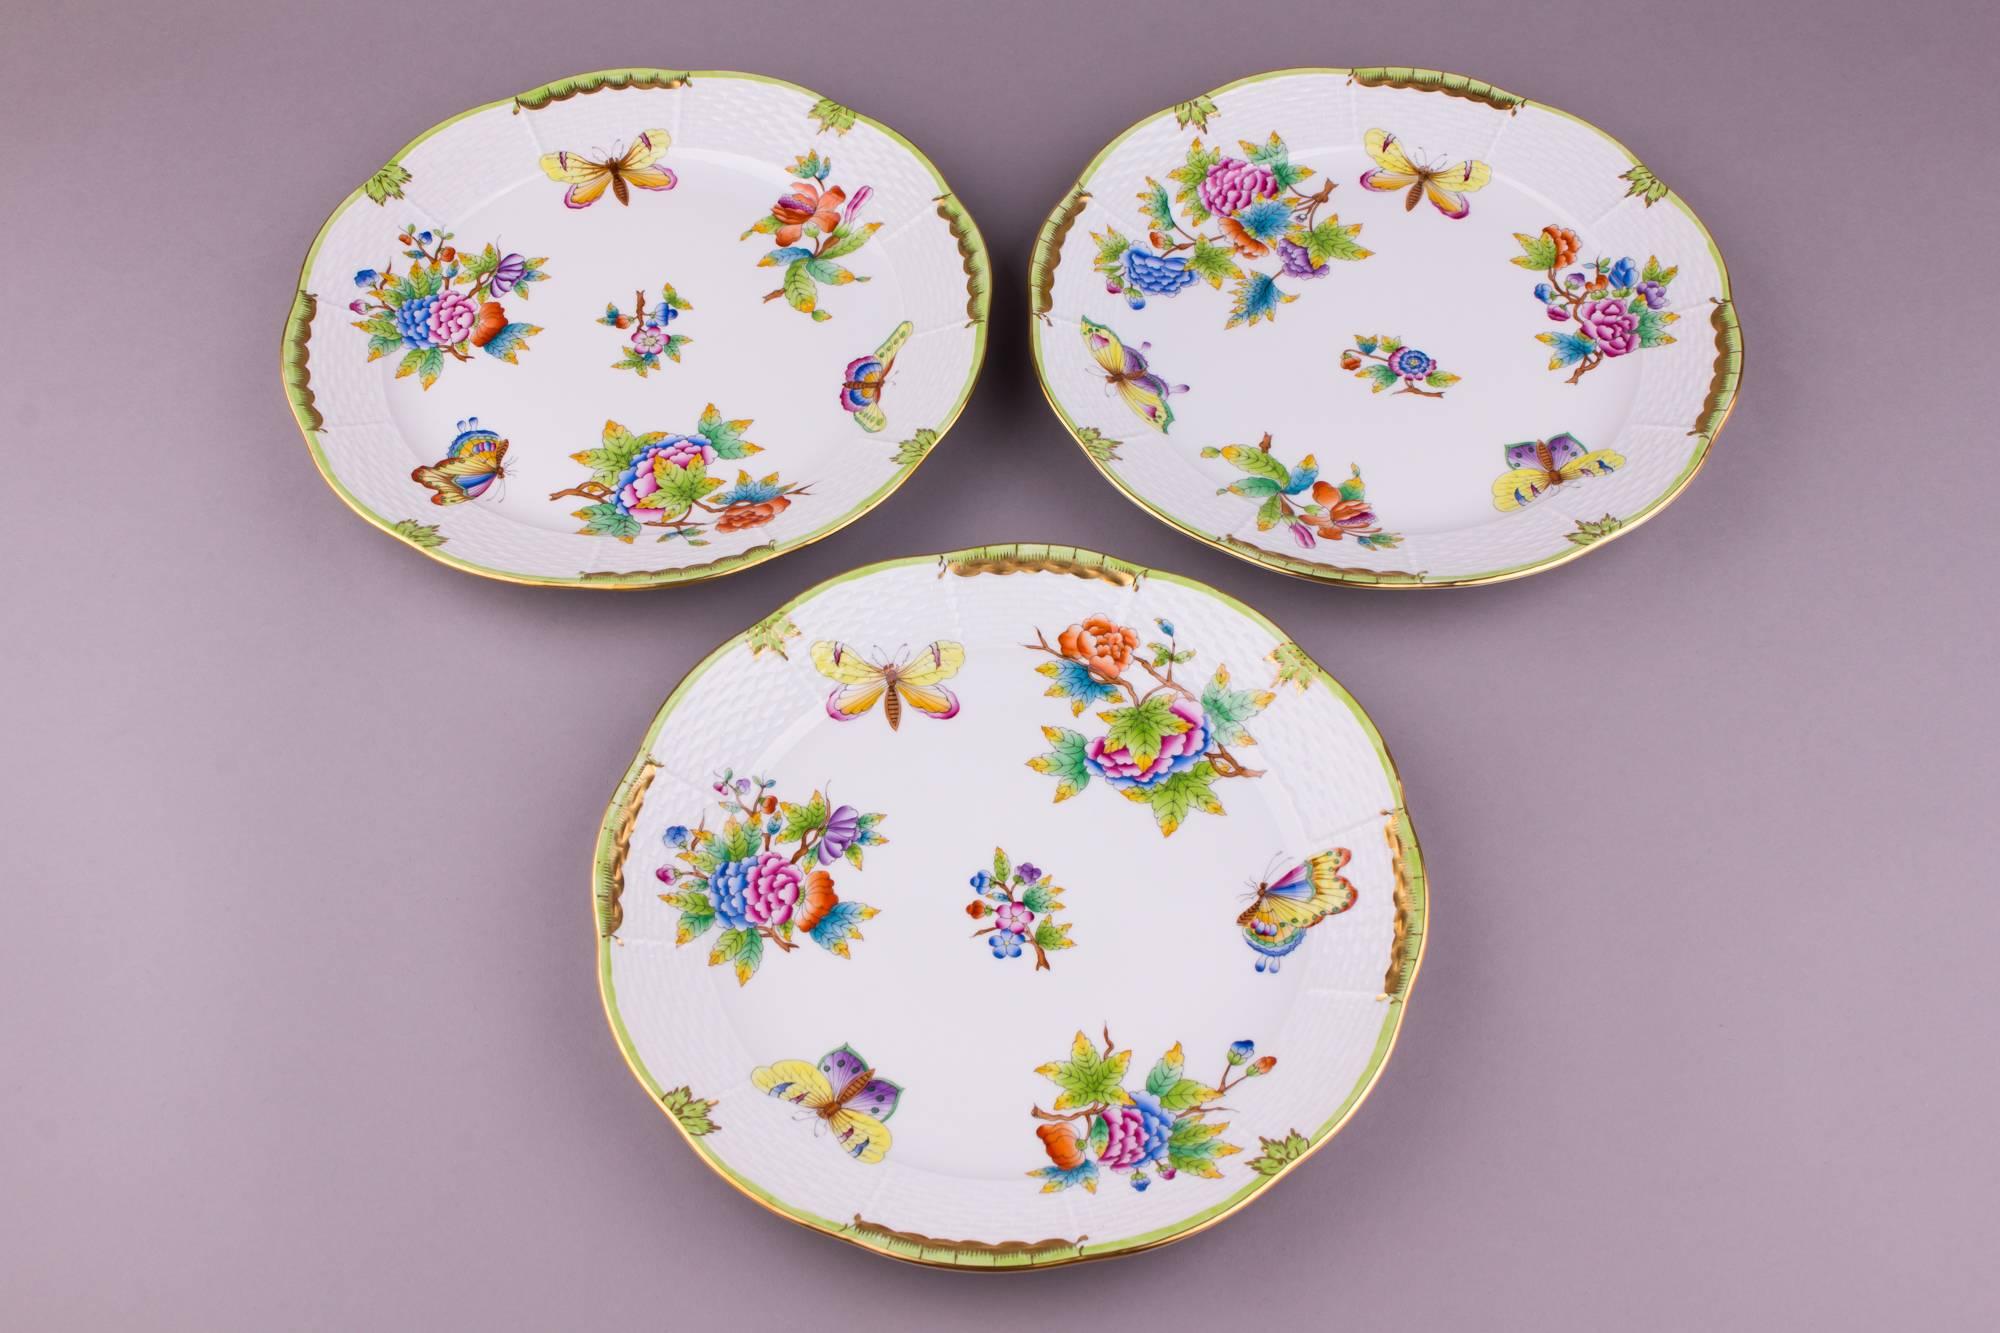 Herend Queen Victoria Plate Set for Six Persons, 18 Pieces In Excellent Condition For Sale In Budapest, HU